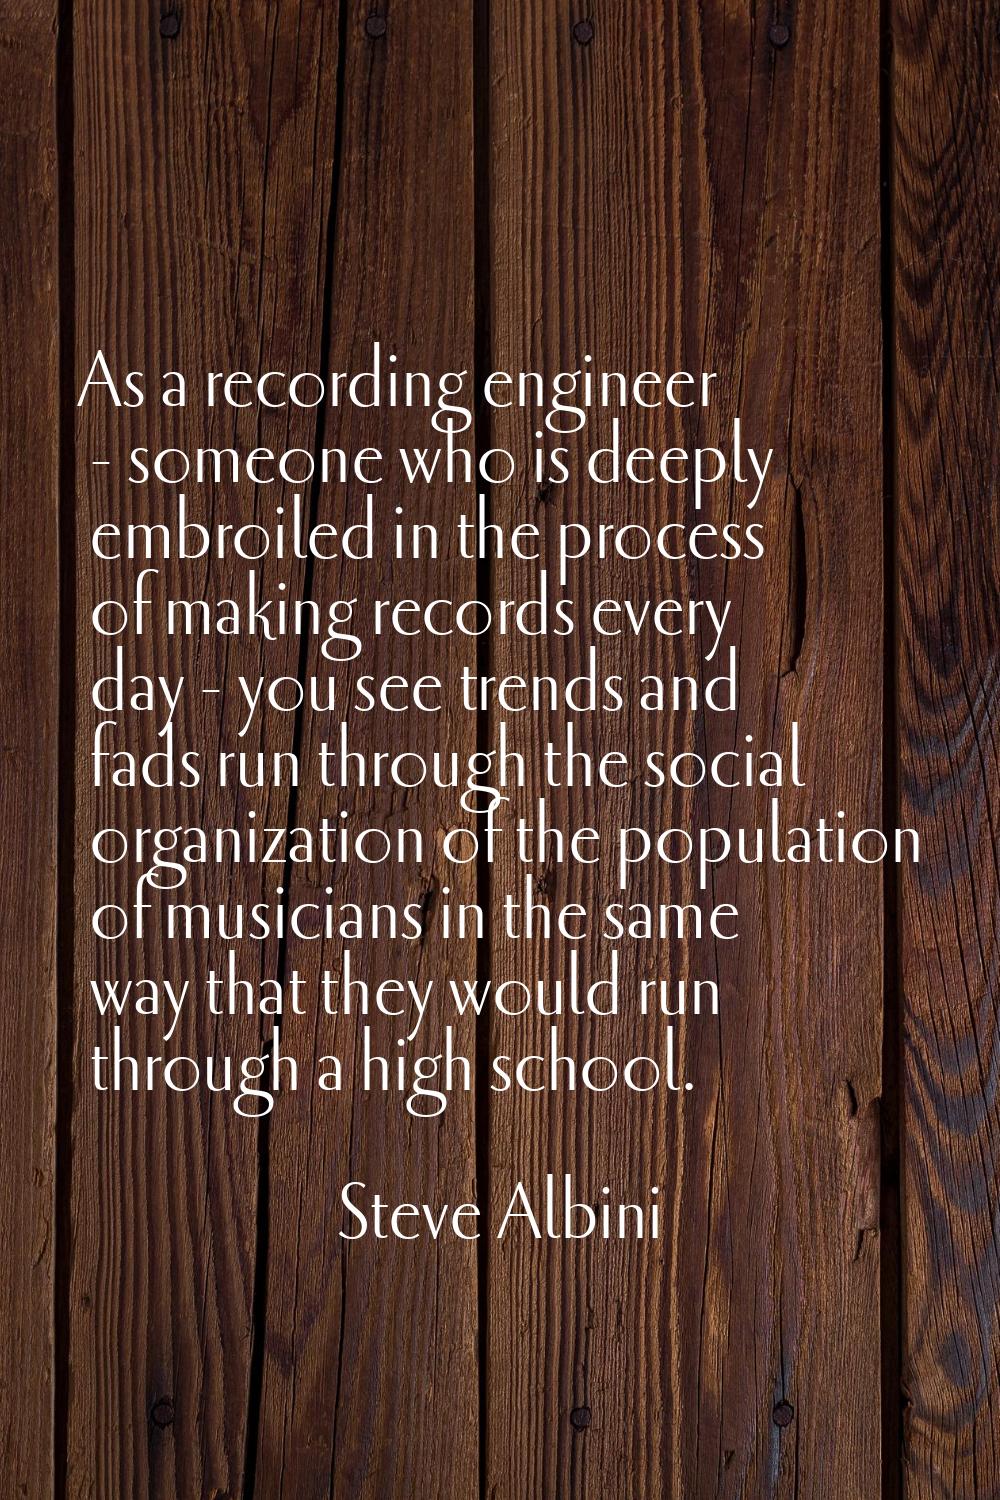 As a recording engineer - someone who is deeply embroiled in the process of making records every da